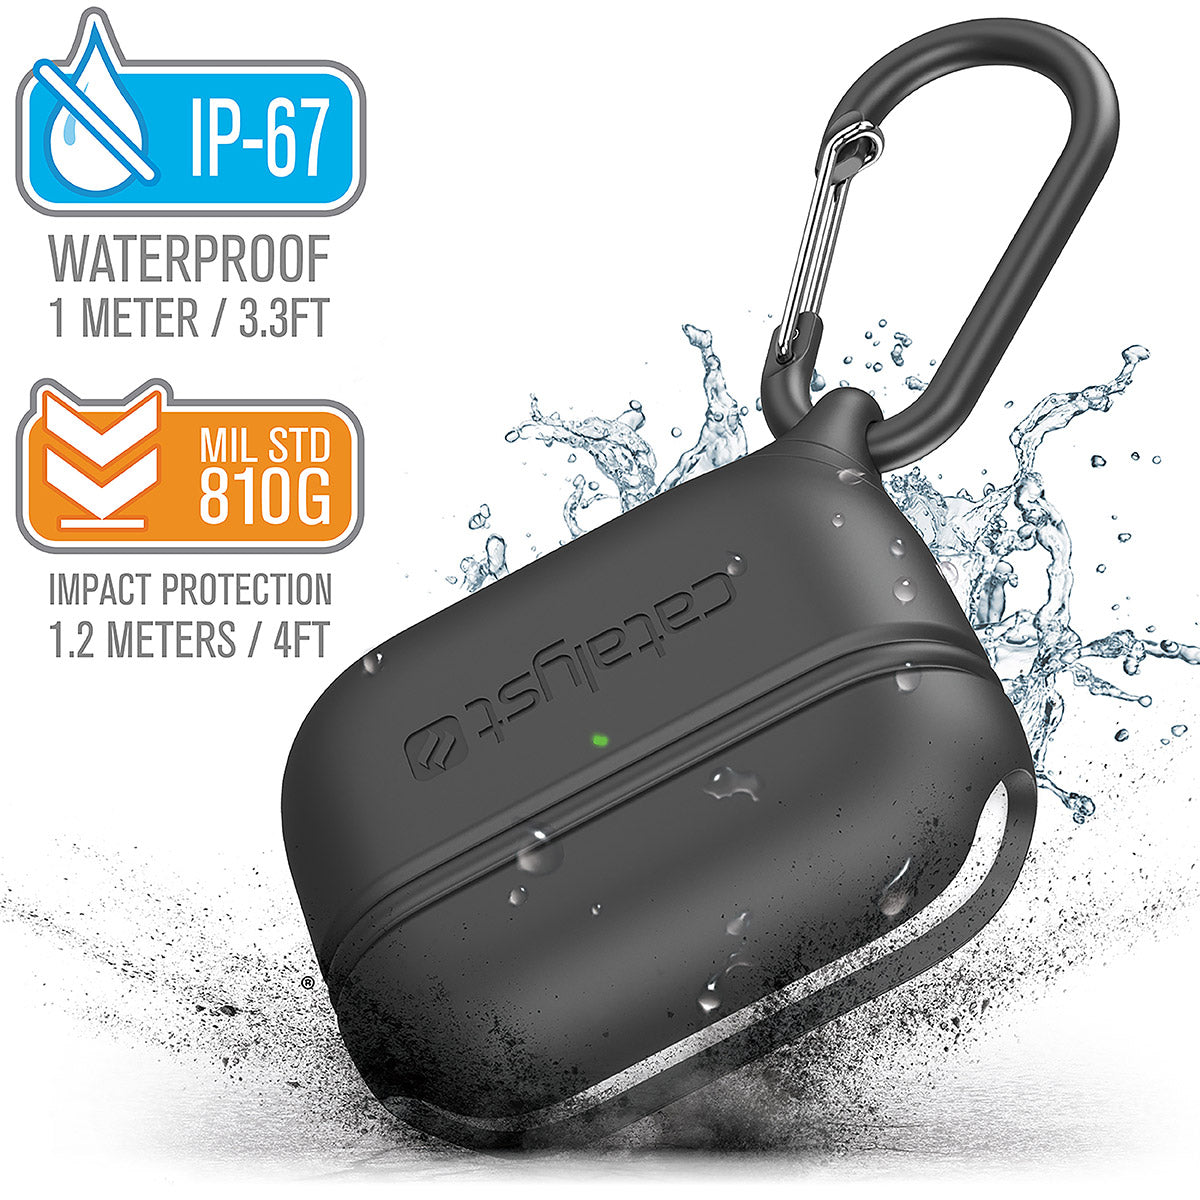 catalyst airpods pro gen 2 1 waterproof case carabiner special edition black with cracked floor and splashes of water text reads ip-67 waterproof 1 meter 3.3ft mil std 810g impact protection 1.2 meters 4ft